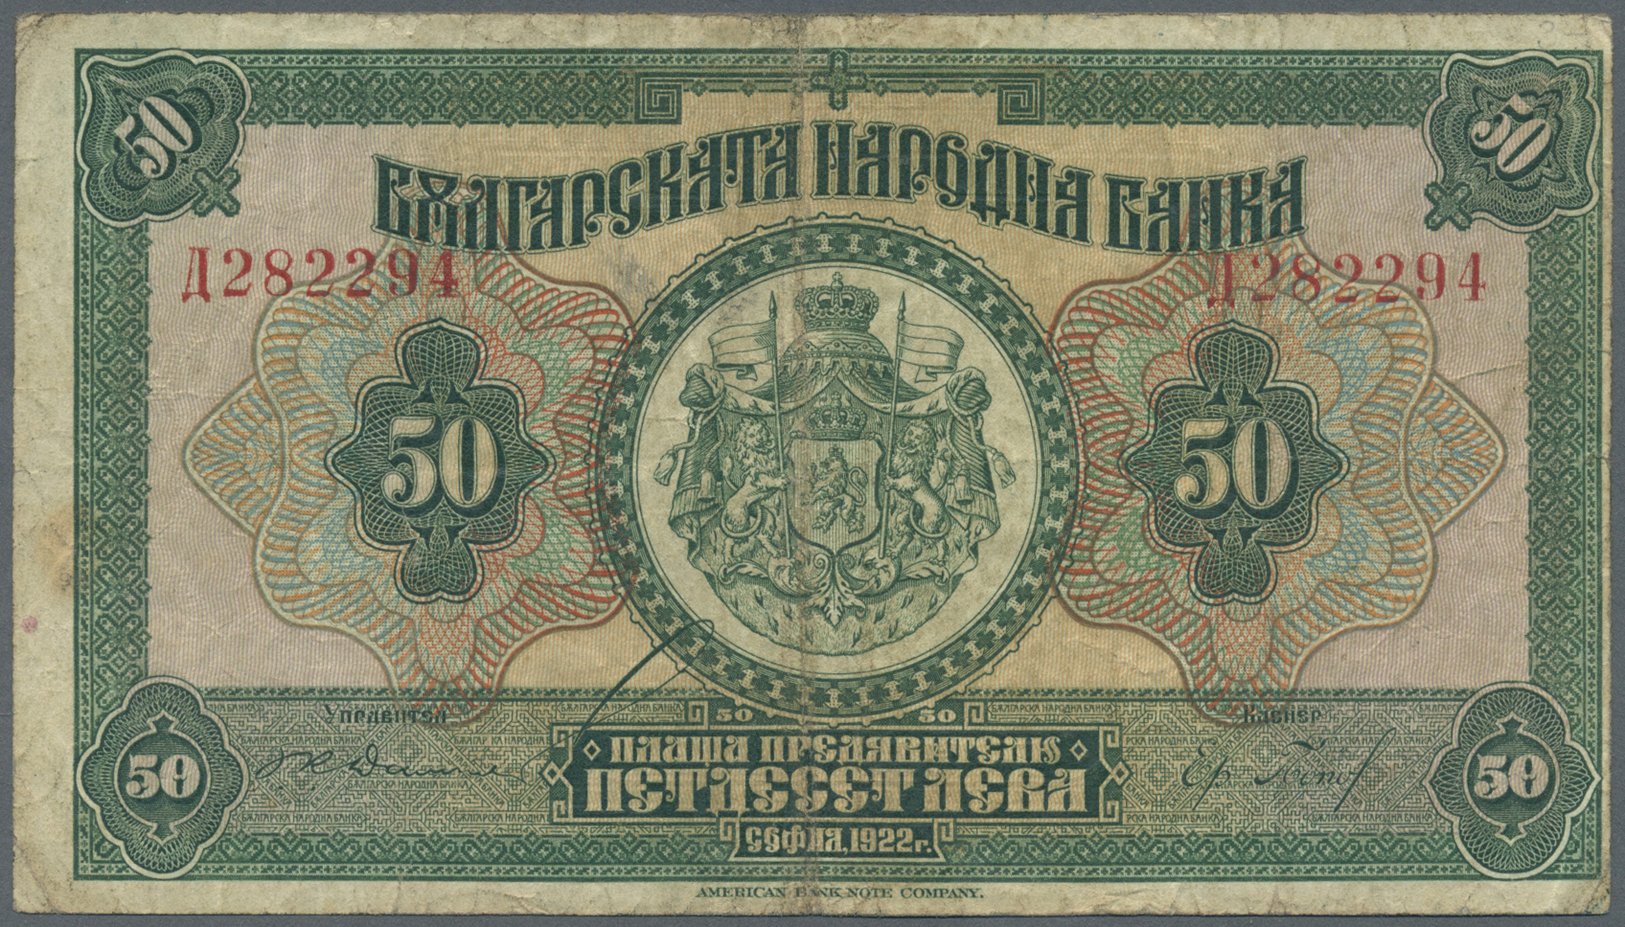 00390 Bulgaria / Bulgarien: 50 Leva 1922, P.37 In Well Worn Condition With Stained Paper And Several Folds And Creases. - Bulgaria